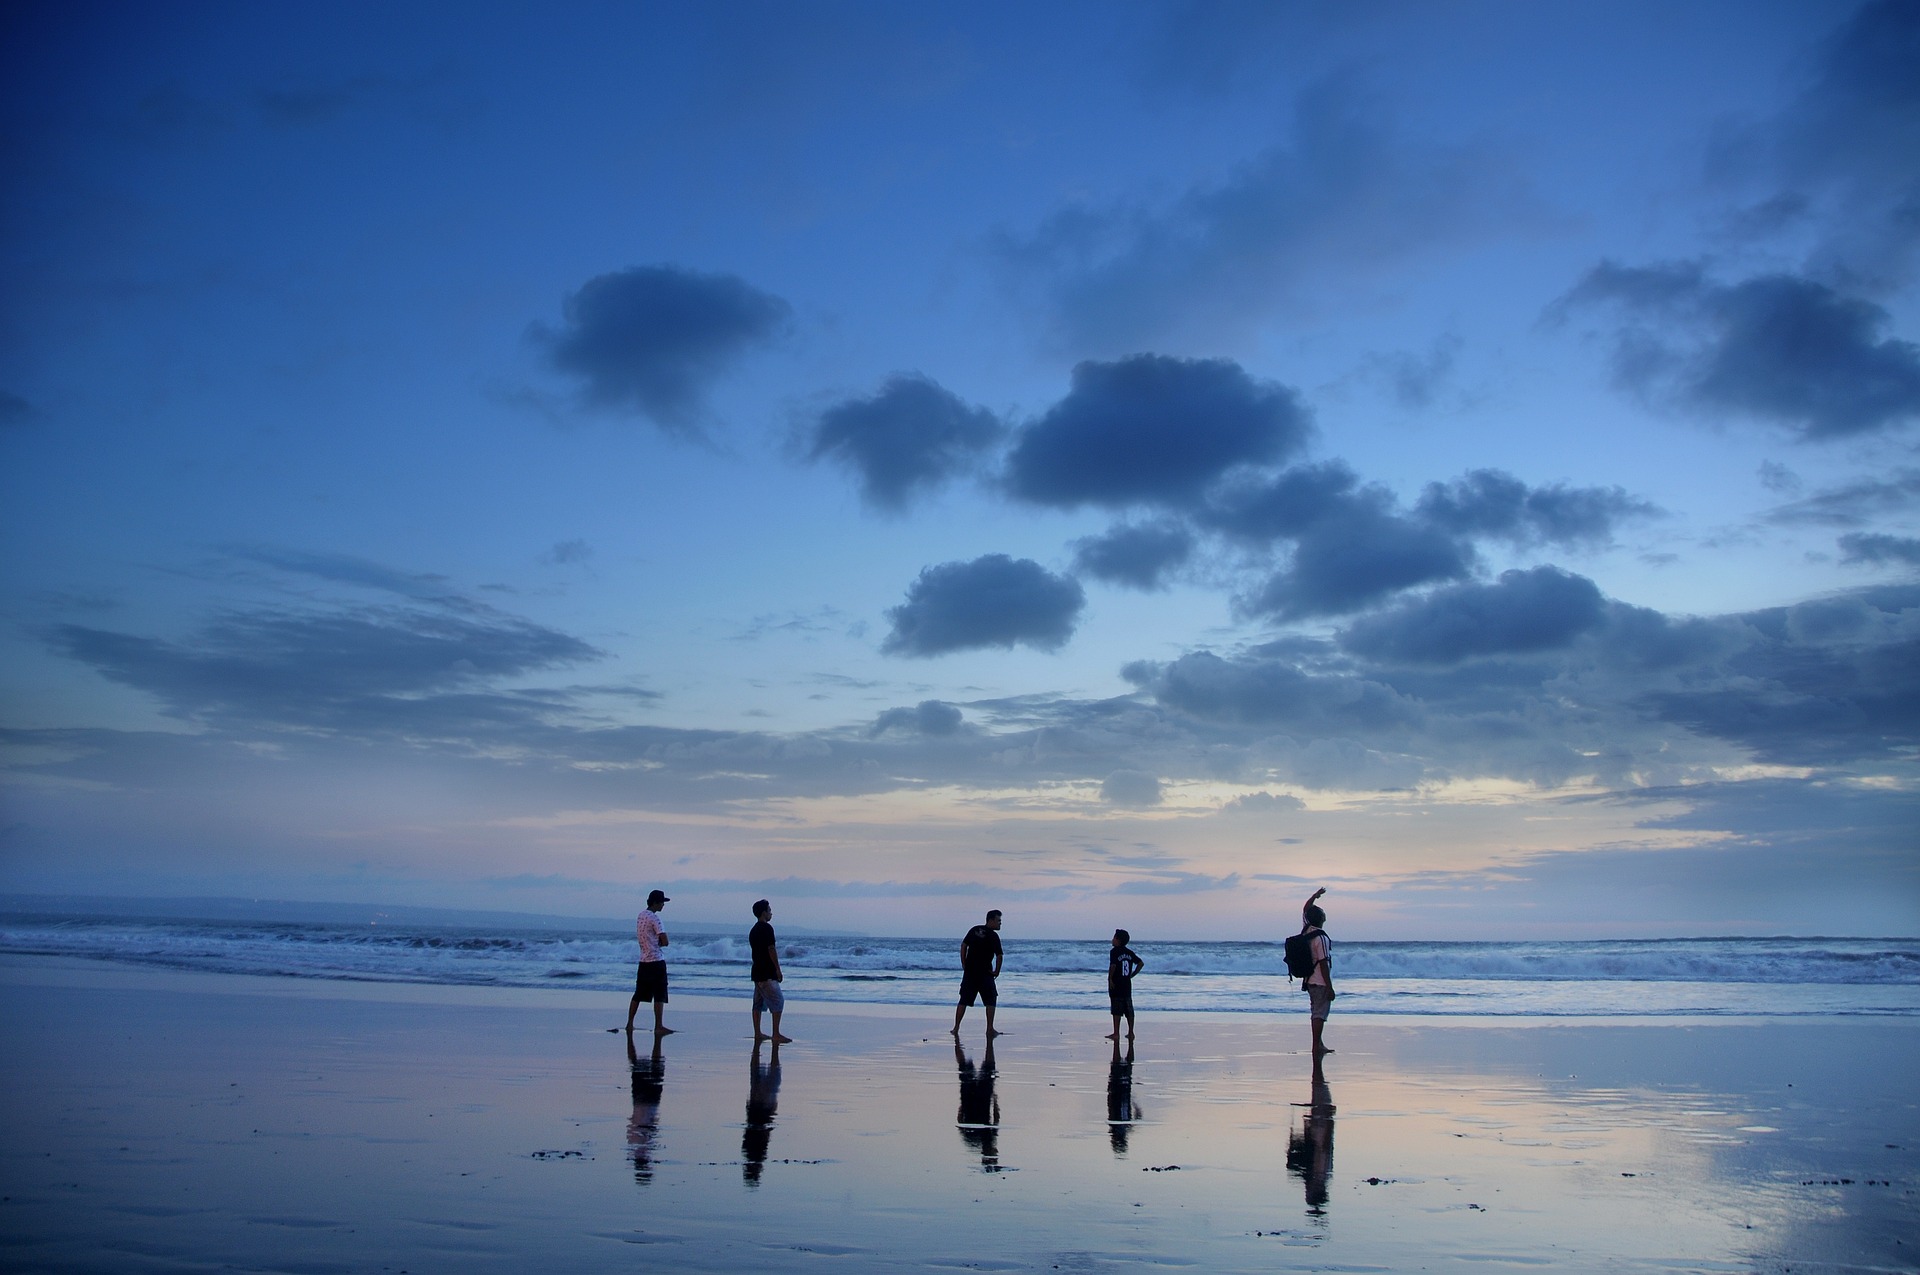 A beach in Bali during dusk, with some peoples playing